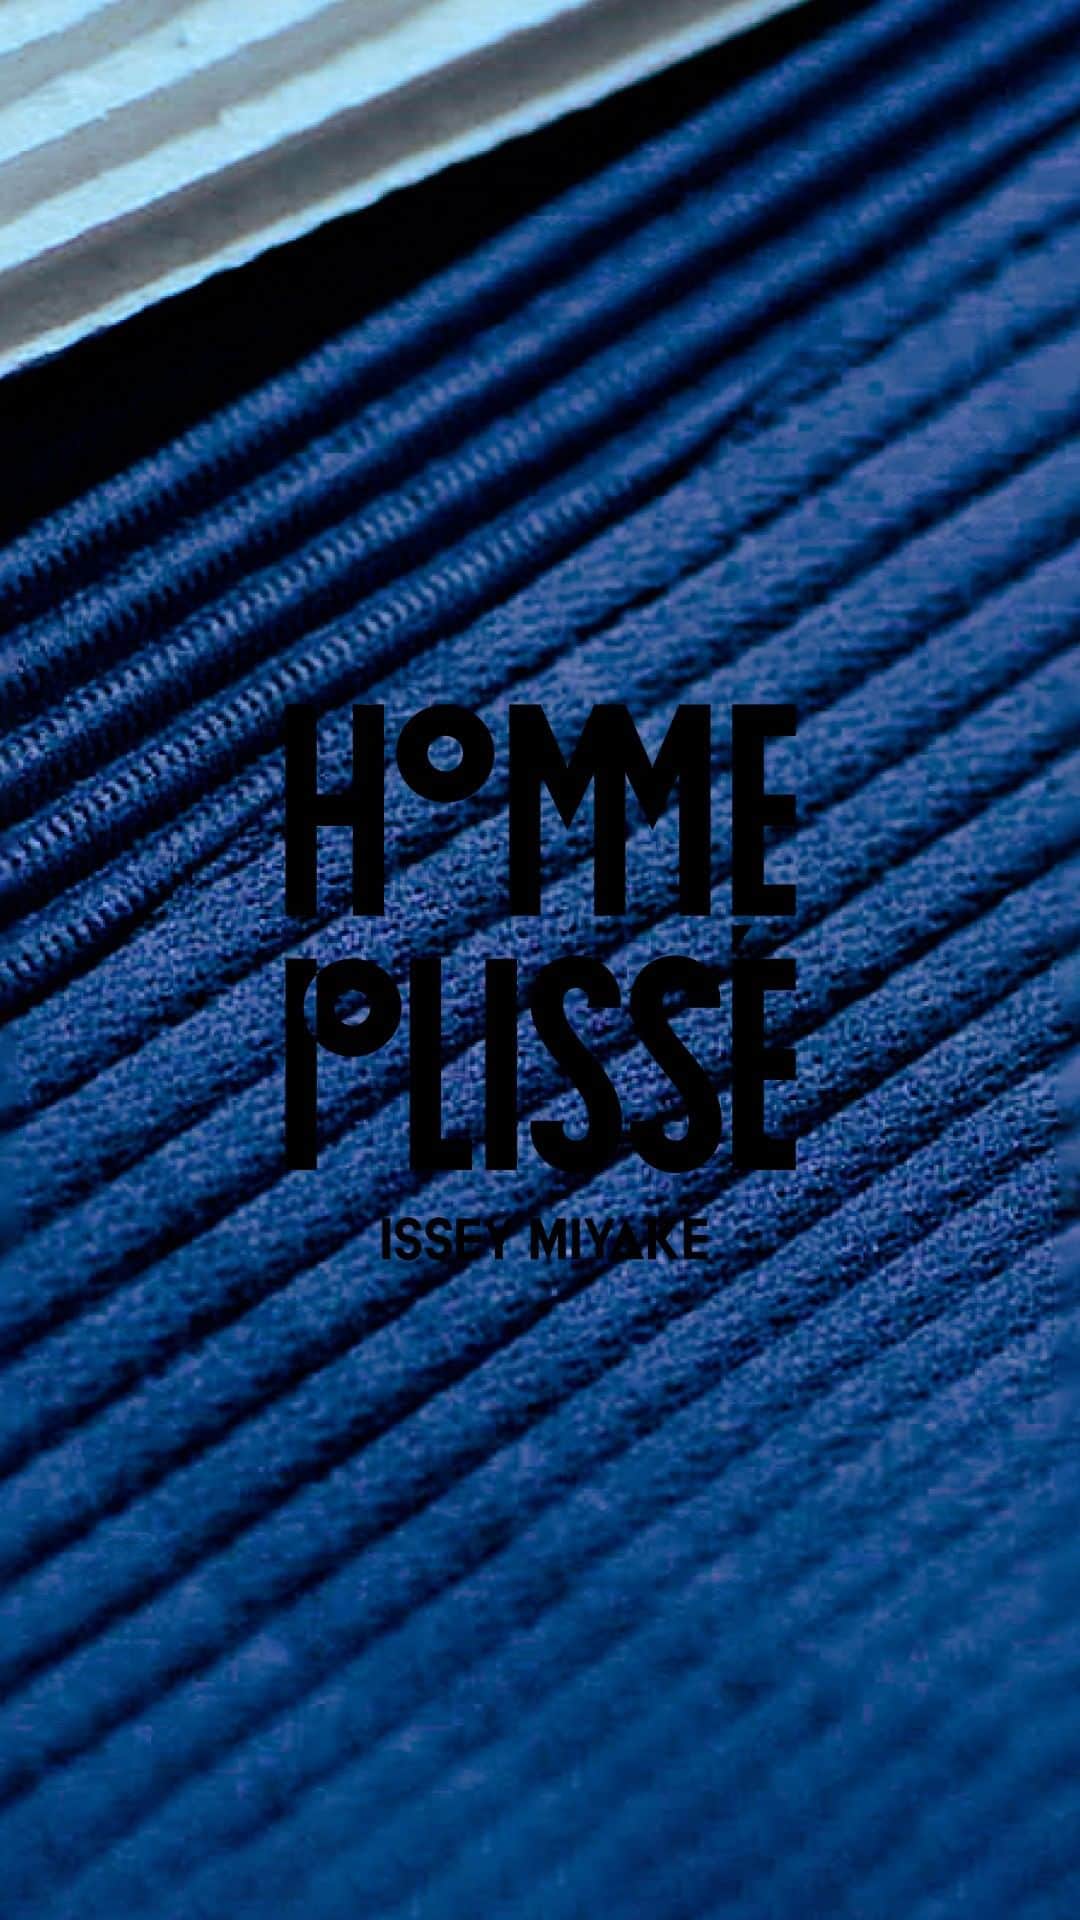 HOMME PLISSÉ ISSEY MIYAKE Official Instagram accountのインスタグラム：「HOMME PLISSÉ ISSEY MIYAKE premiered its AUTUMN WINTER 2021/22 collection Never Change, Ever Change online on Thursday, January 21. This collection looked at classic and conventional clothing styles from a modern perspective, and by integrating original ideas and techniques into them created what will be the new basics of the brand. This collection embodies the brand's intent to evolve, while always staying true to its approach to design and making, as it continues to produce clothing that reflects our changing lifestyles.  HOMME PLISSÉ ISSEY MIYAKEは1月21日（木）、「Never Change, Ever Change —変わらないもの、変わり続けるもの—」をテーマに、2021/22年秋冬コレクションをオンライン形式で発表しました。今回のコレクションは、クラシックやスタンダードとされているスタイルにあらためて目を向け、独自の視点と技術を取り入れることで、ブランドの新たな基本となる服のかたちを見出しました。一貫したものづくりの姿勢でプロダクト性に立ち返りながら、日々の生活に溶け込む服のさらなる進化を図ります。」